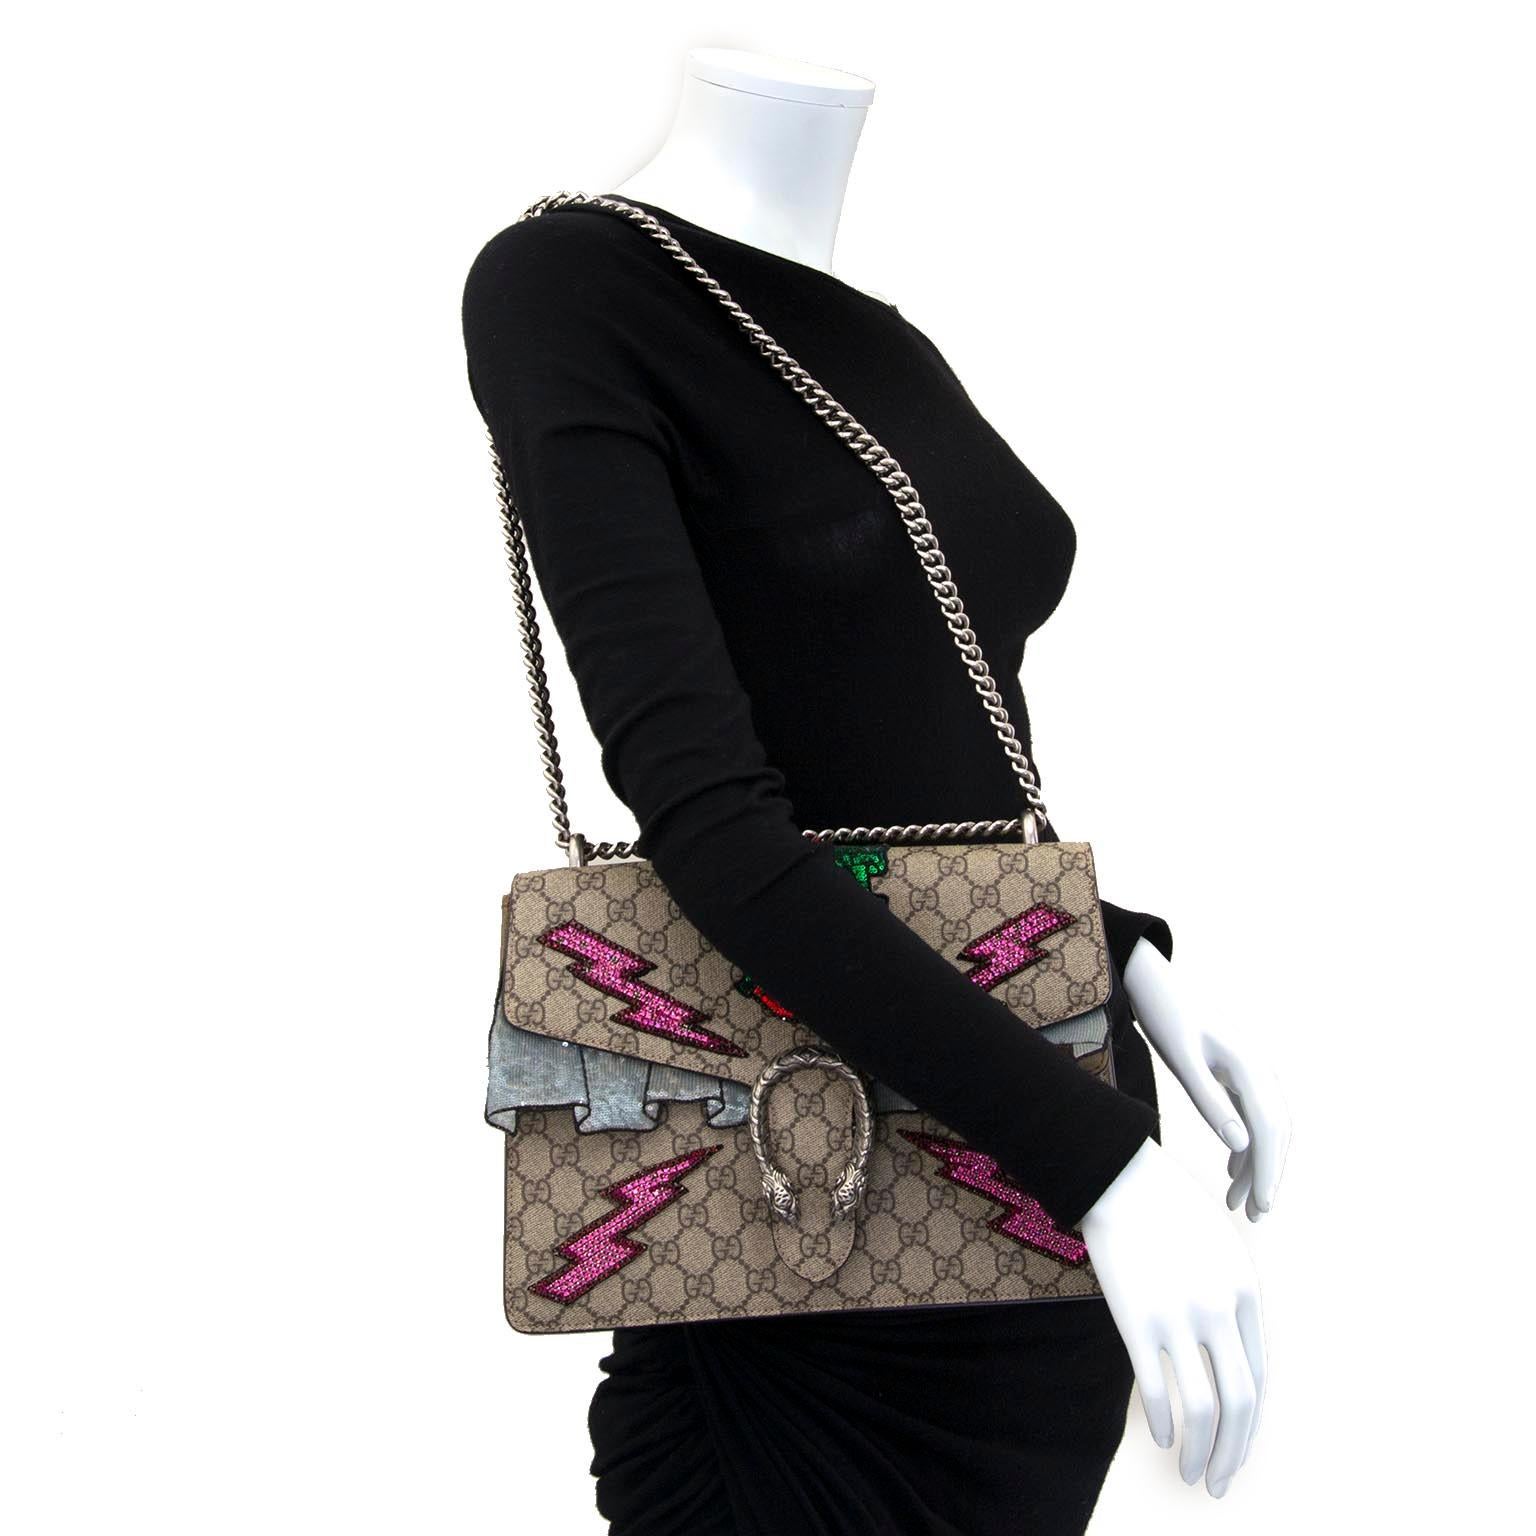 Excellent condition

Gucci GG Dionysus Supreme Embroidered Monogram Shoulder Bag

Stand out with this gorgeous bag by Gucci. 
This bag is crafted of traditional Gucci GG Monogram supreme canvas and finished with four pink lightening bolts and red